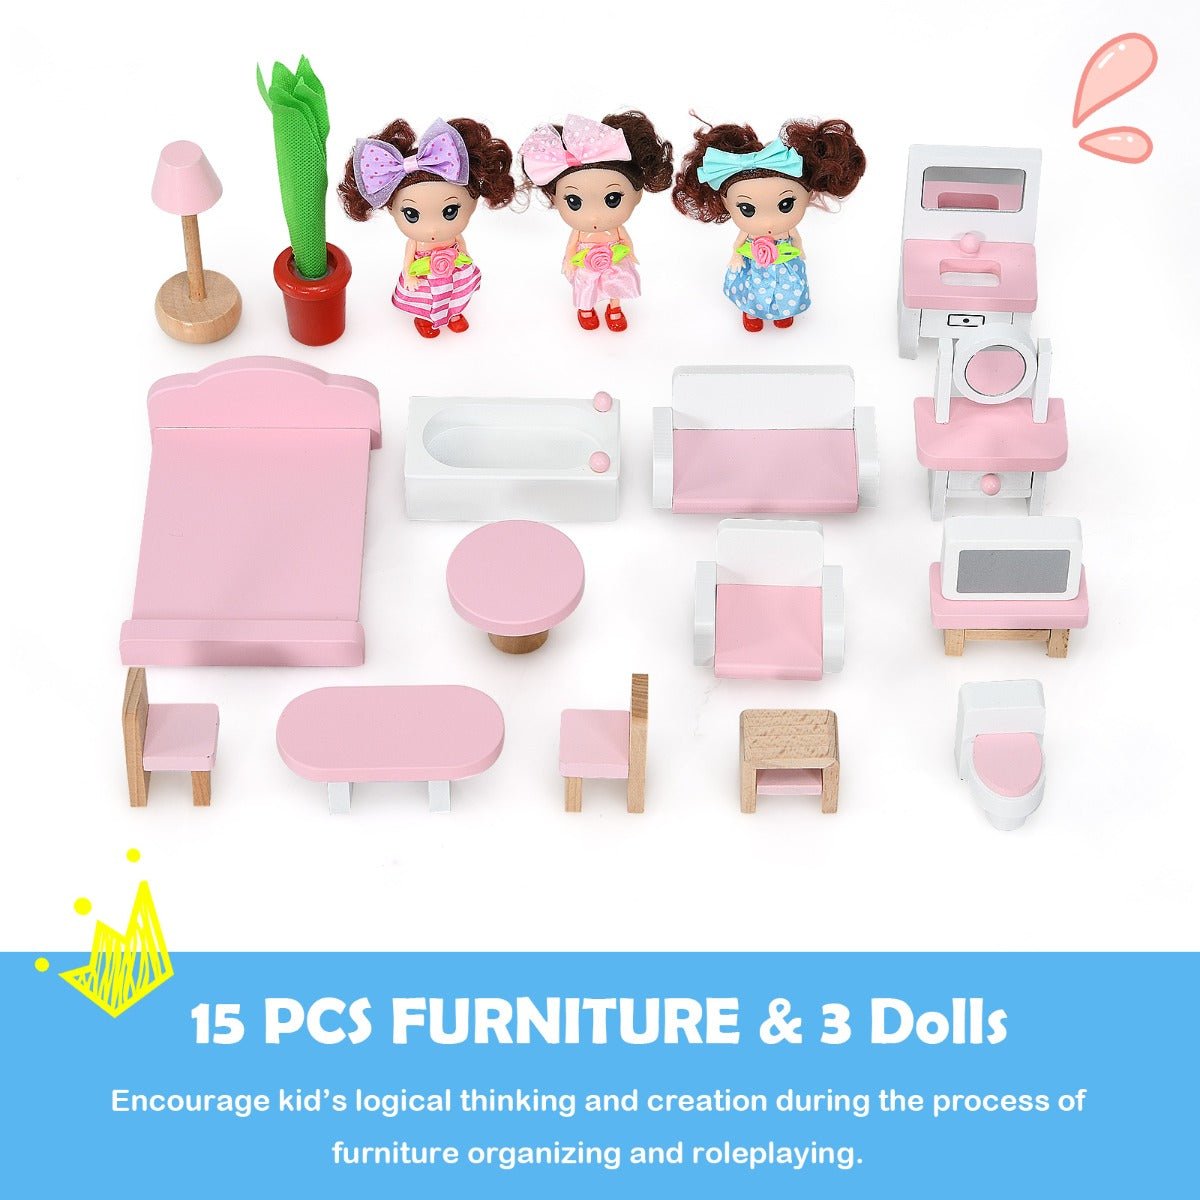 Dreamy Dollhouse: Wooden Dollhouse Playset with 15-Piece Furniture for Endless Stories